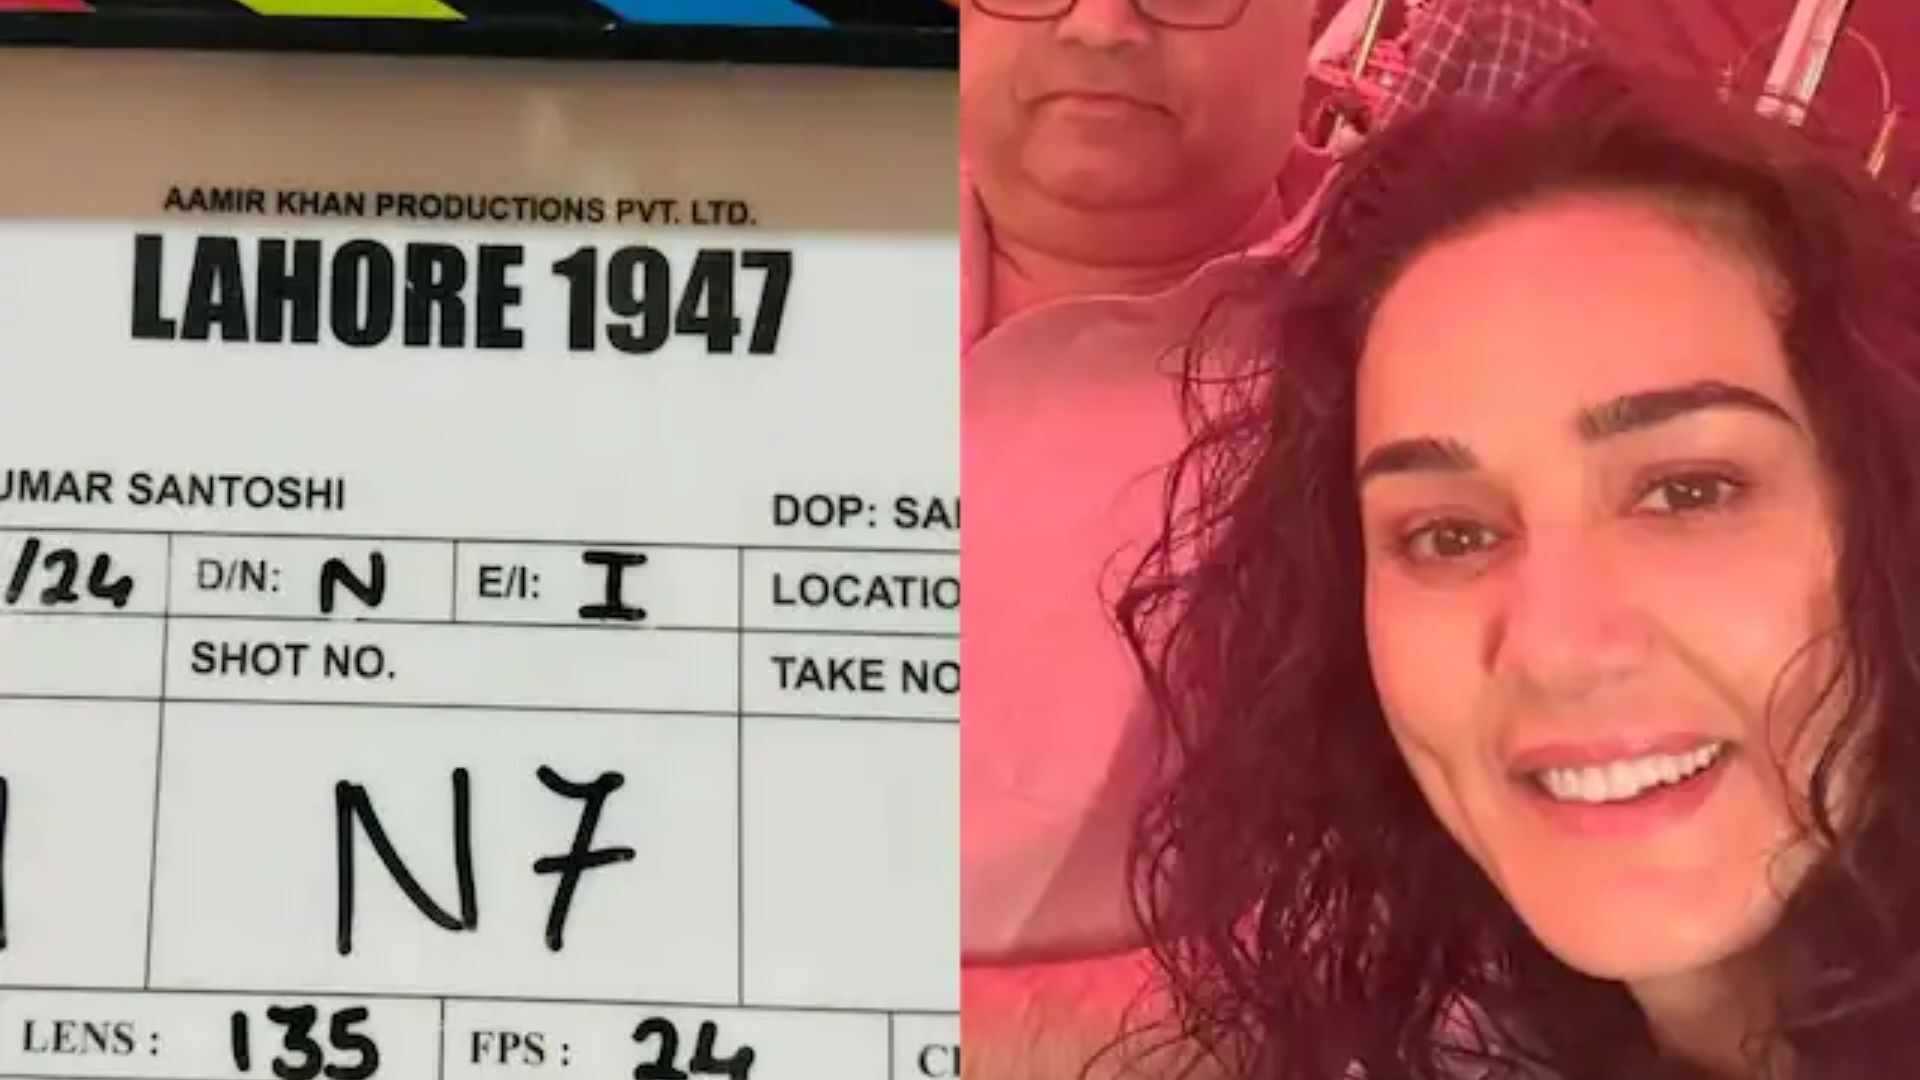 Preity Zinta starts filming for ‘Lahore 1947’